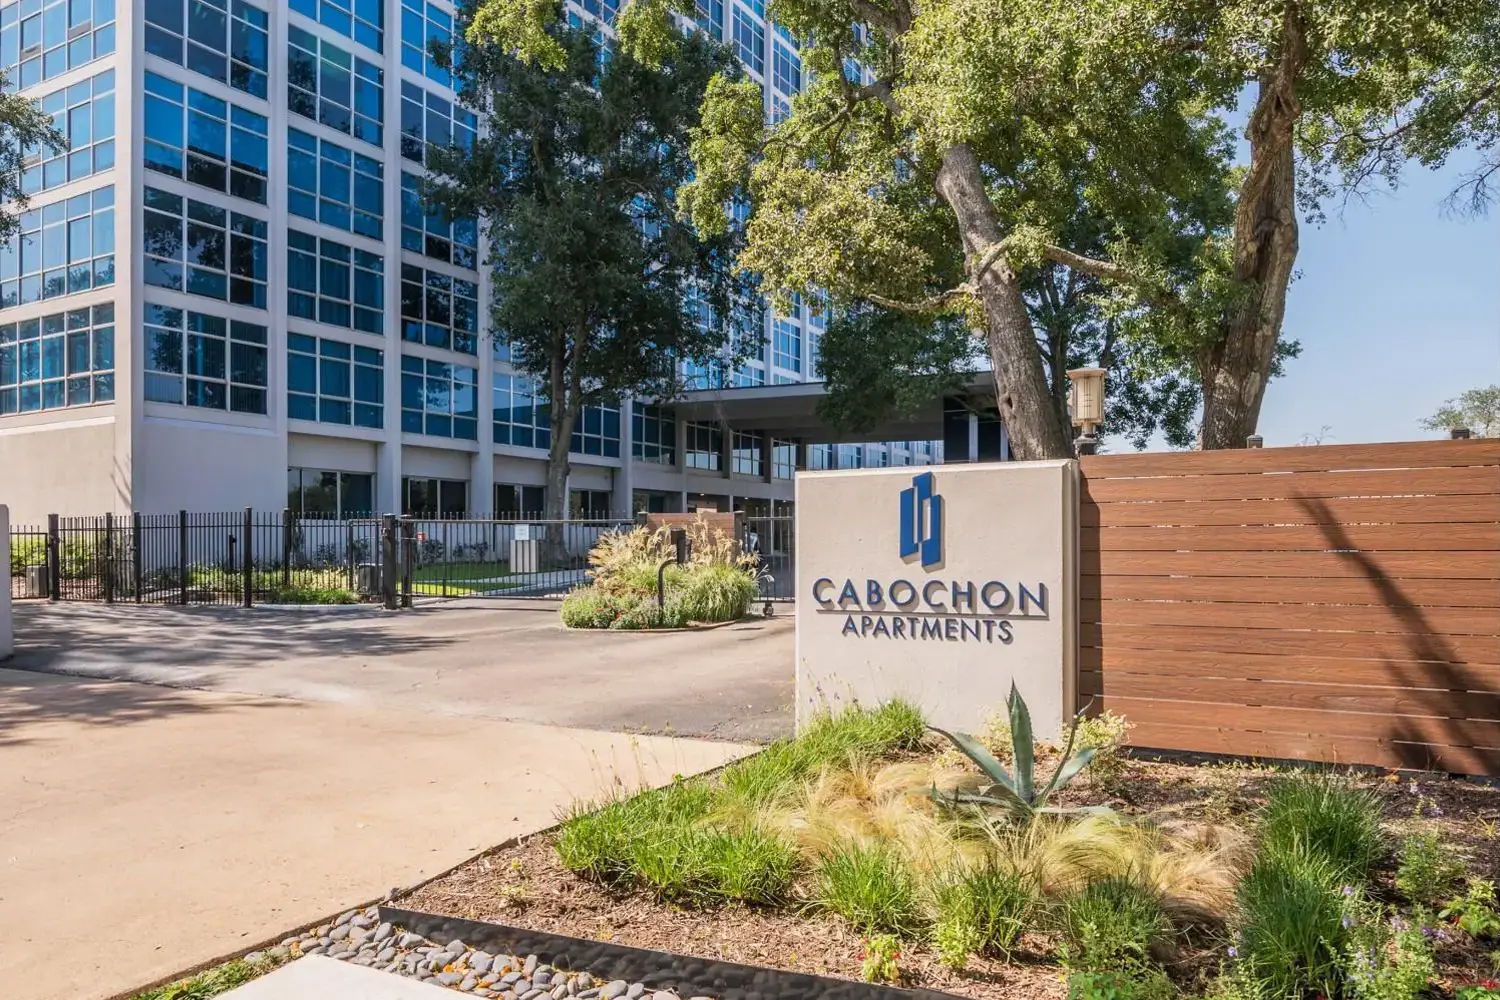 Entrance of Cabochon Apartments, a modern high-rise building with blue-tinted windows, landscaped with trees, shrubs, and grasses.